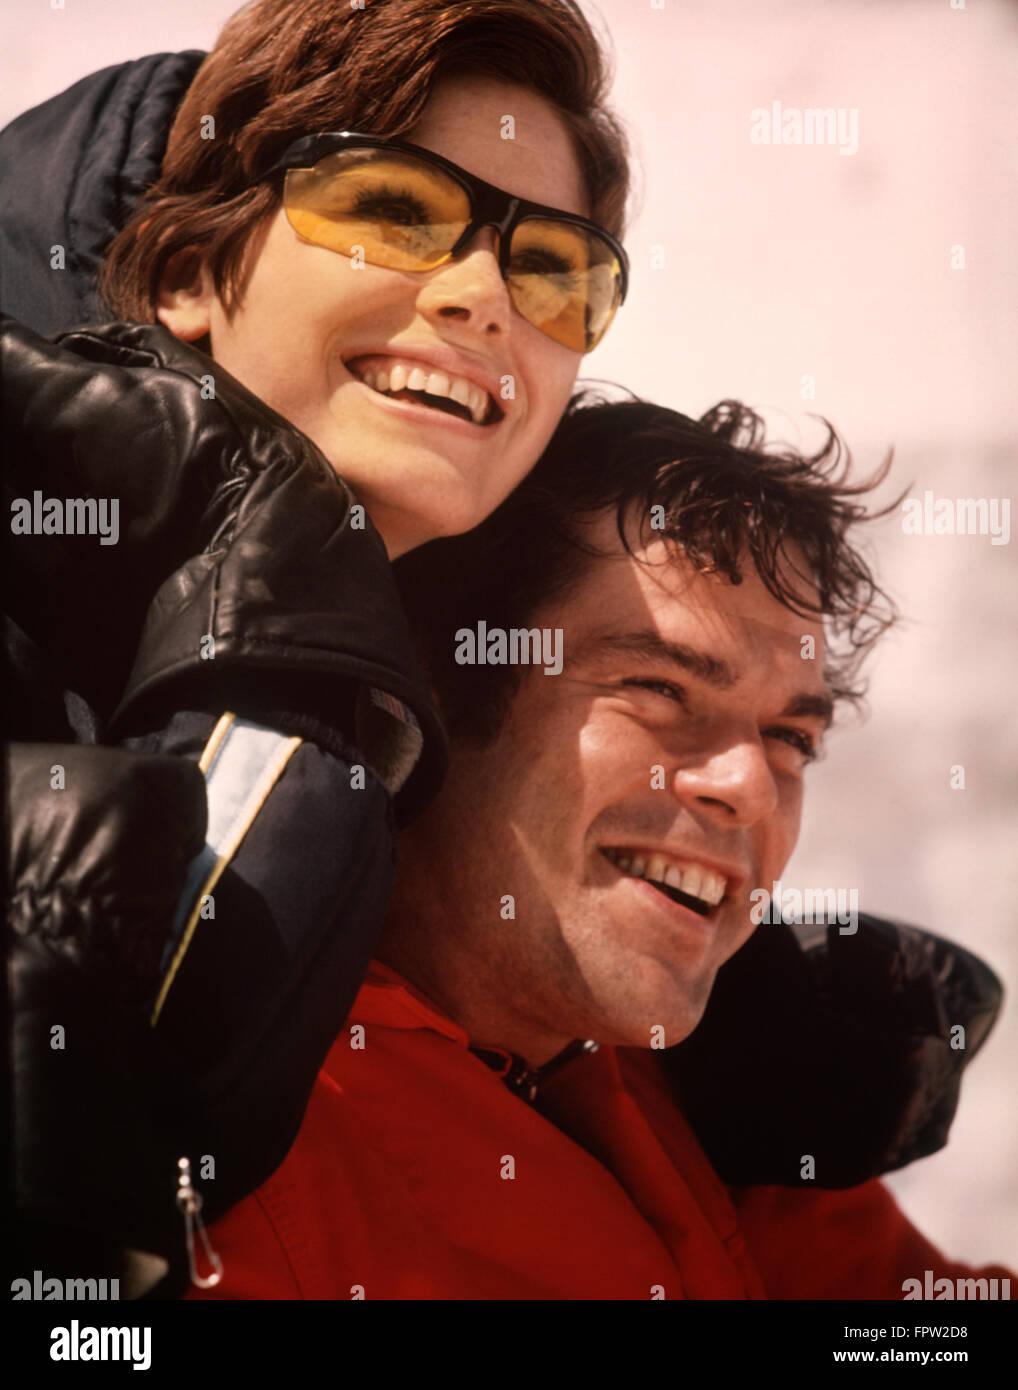 1970s SMILING HAPPY PORTRAIT MAN WOMAN SKI COUPLE JACKETS GLOVES WOMAN WEARING YELLOW GOGGLES GLASSES Stock Photo